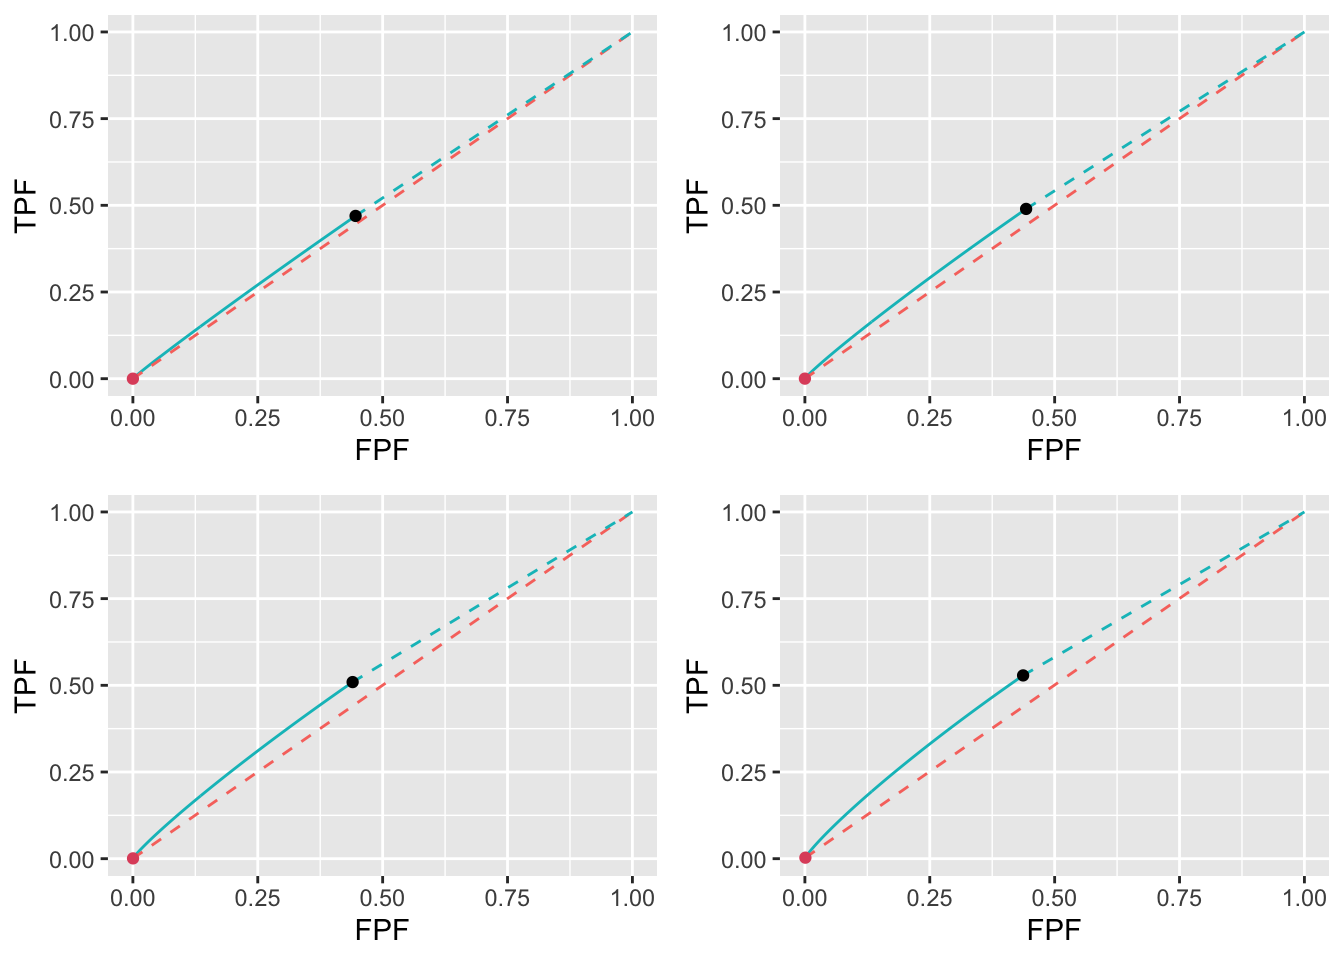 Low performance varying $\nu$ ROC plots for the two optimization methods with superimposed operating points. The color coding is as in previous figures. The values of $\nu$ are: top-left $\nu = 0.1$, top-right $\nu = 0.2$, bottom-left $\nu = 0.3$ and bottom-right $\nu = 0.4$.